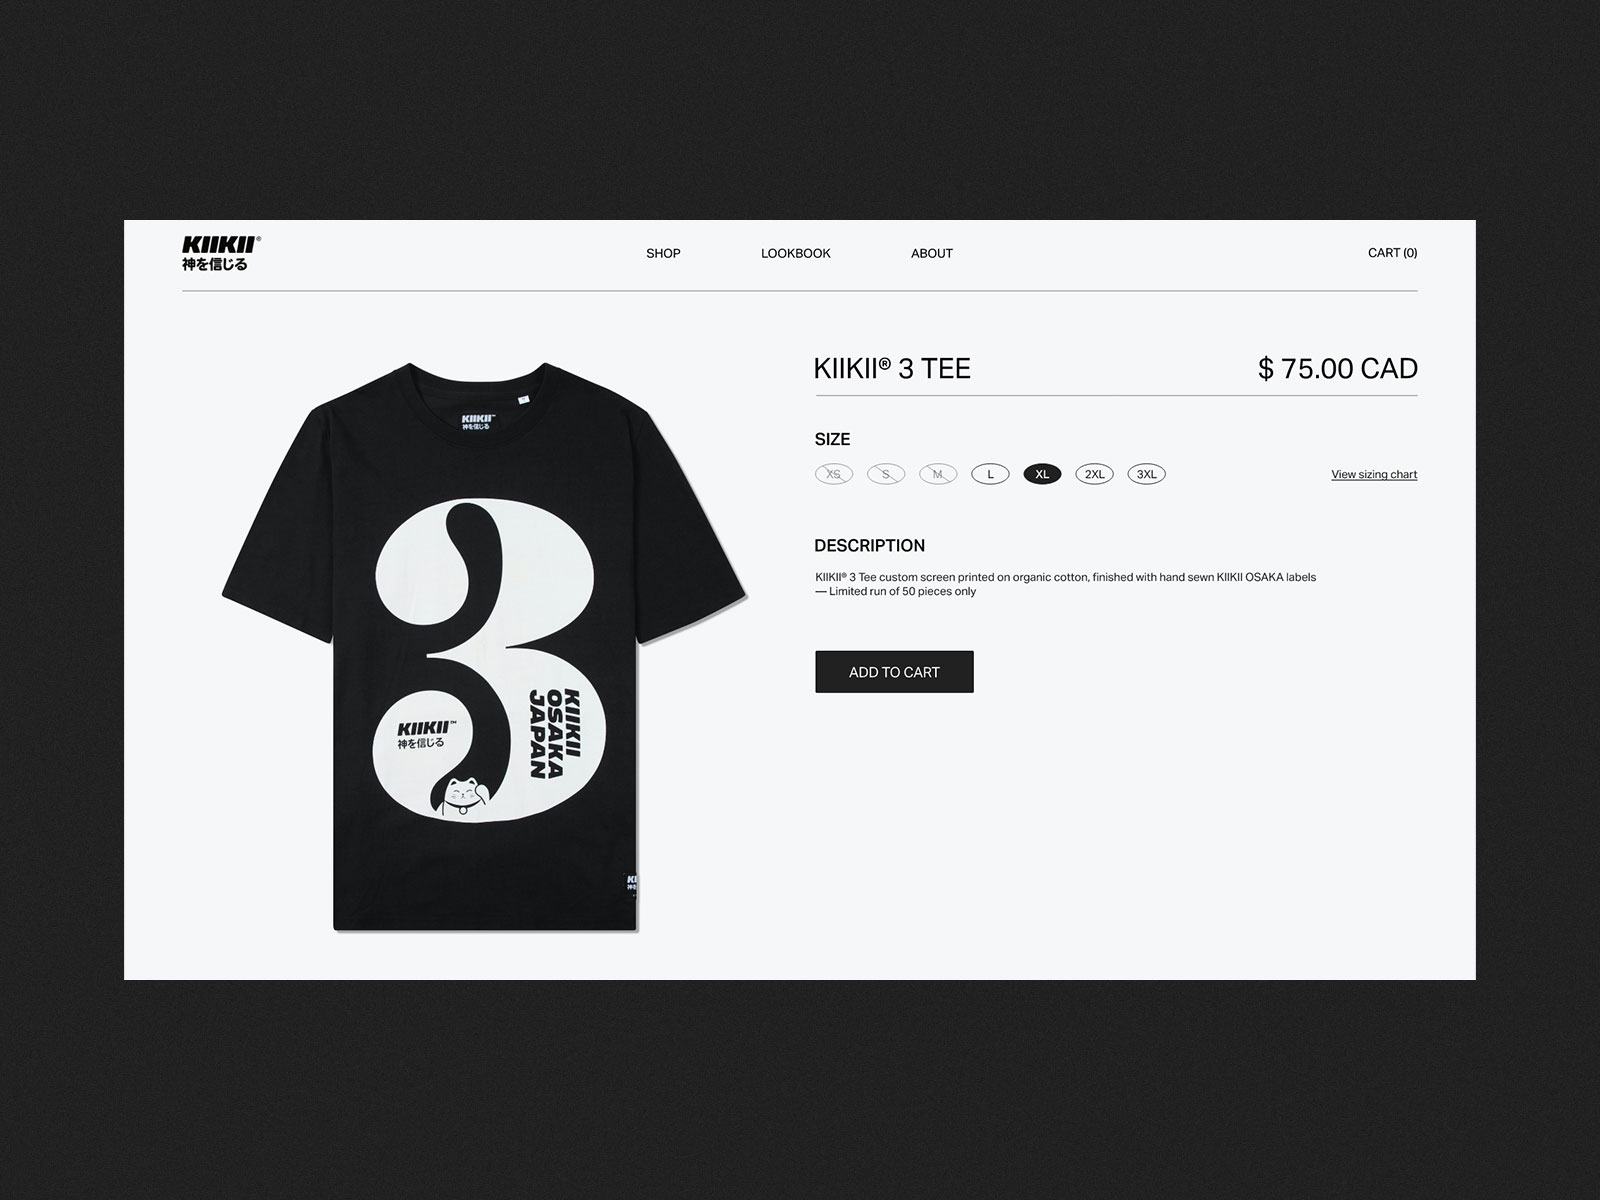 Product page by Lionel on Dribbble